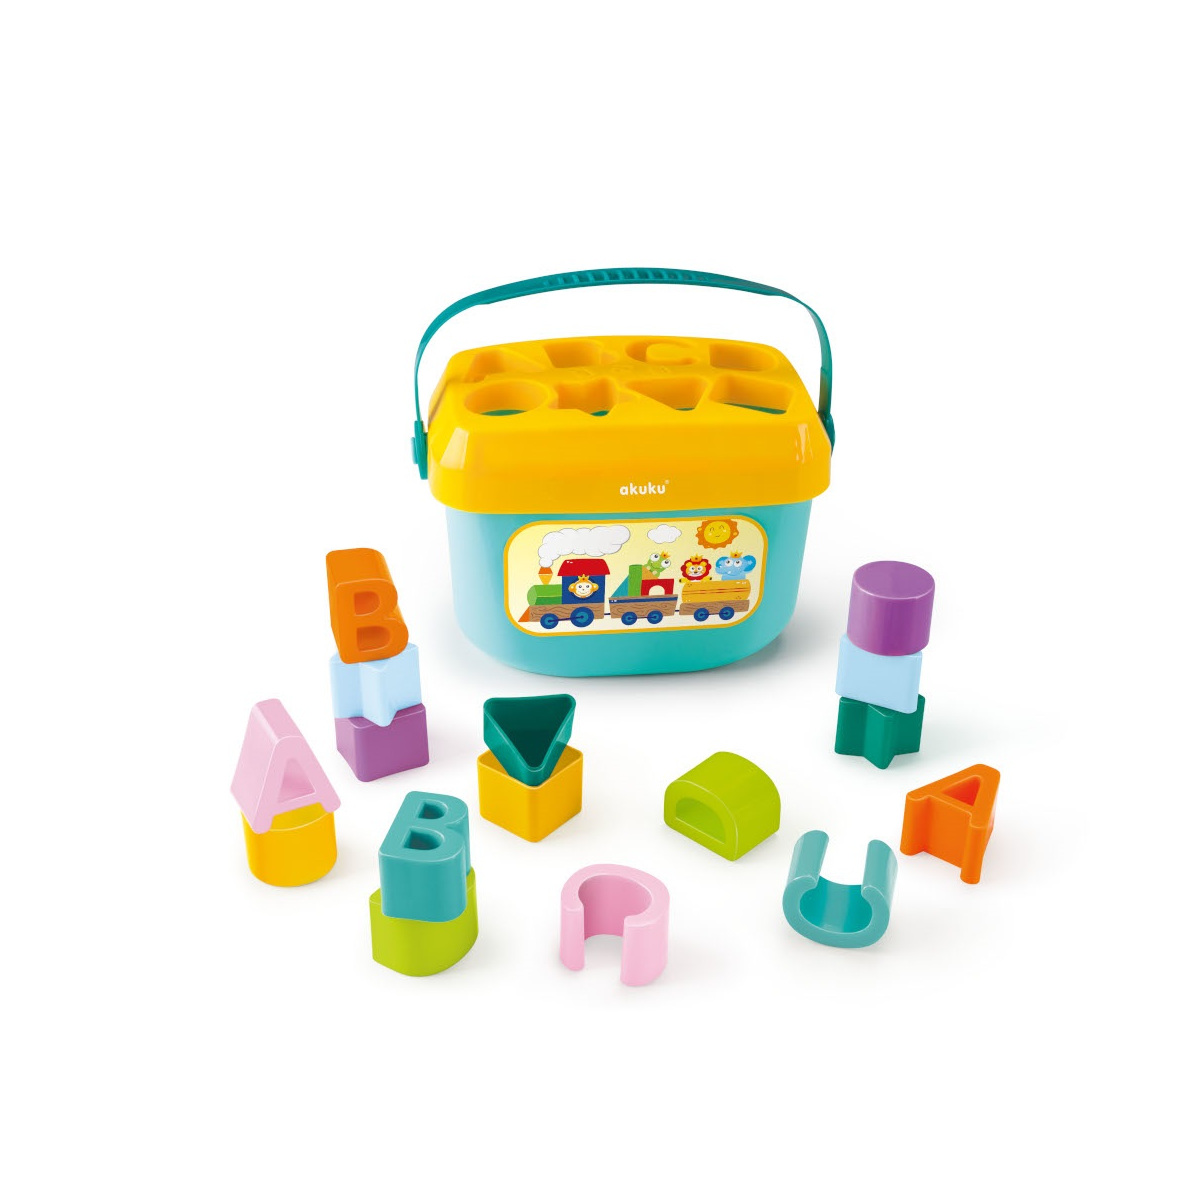 Educational bucket with blocks A0459